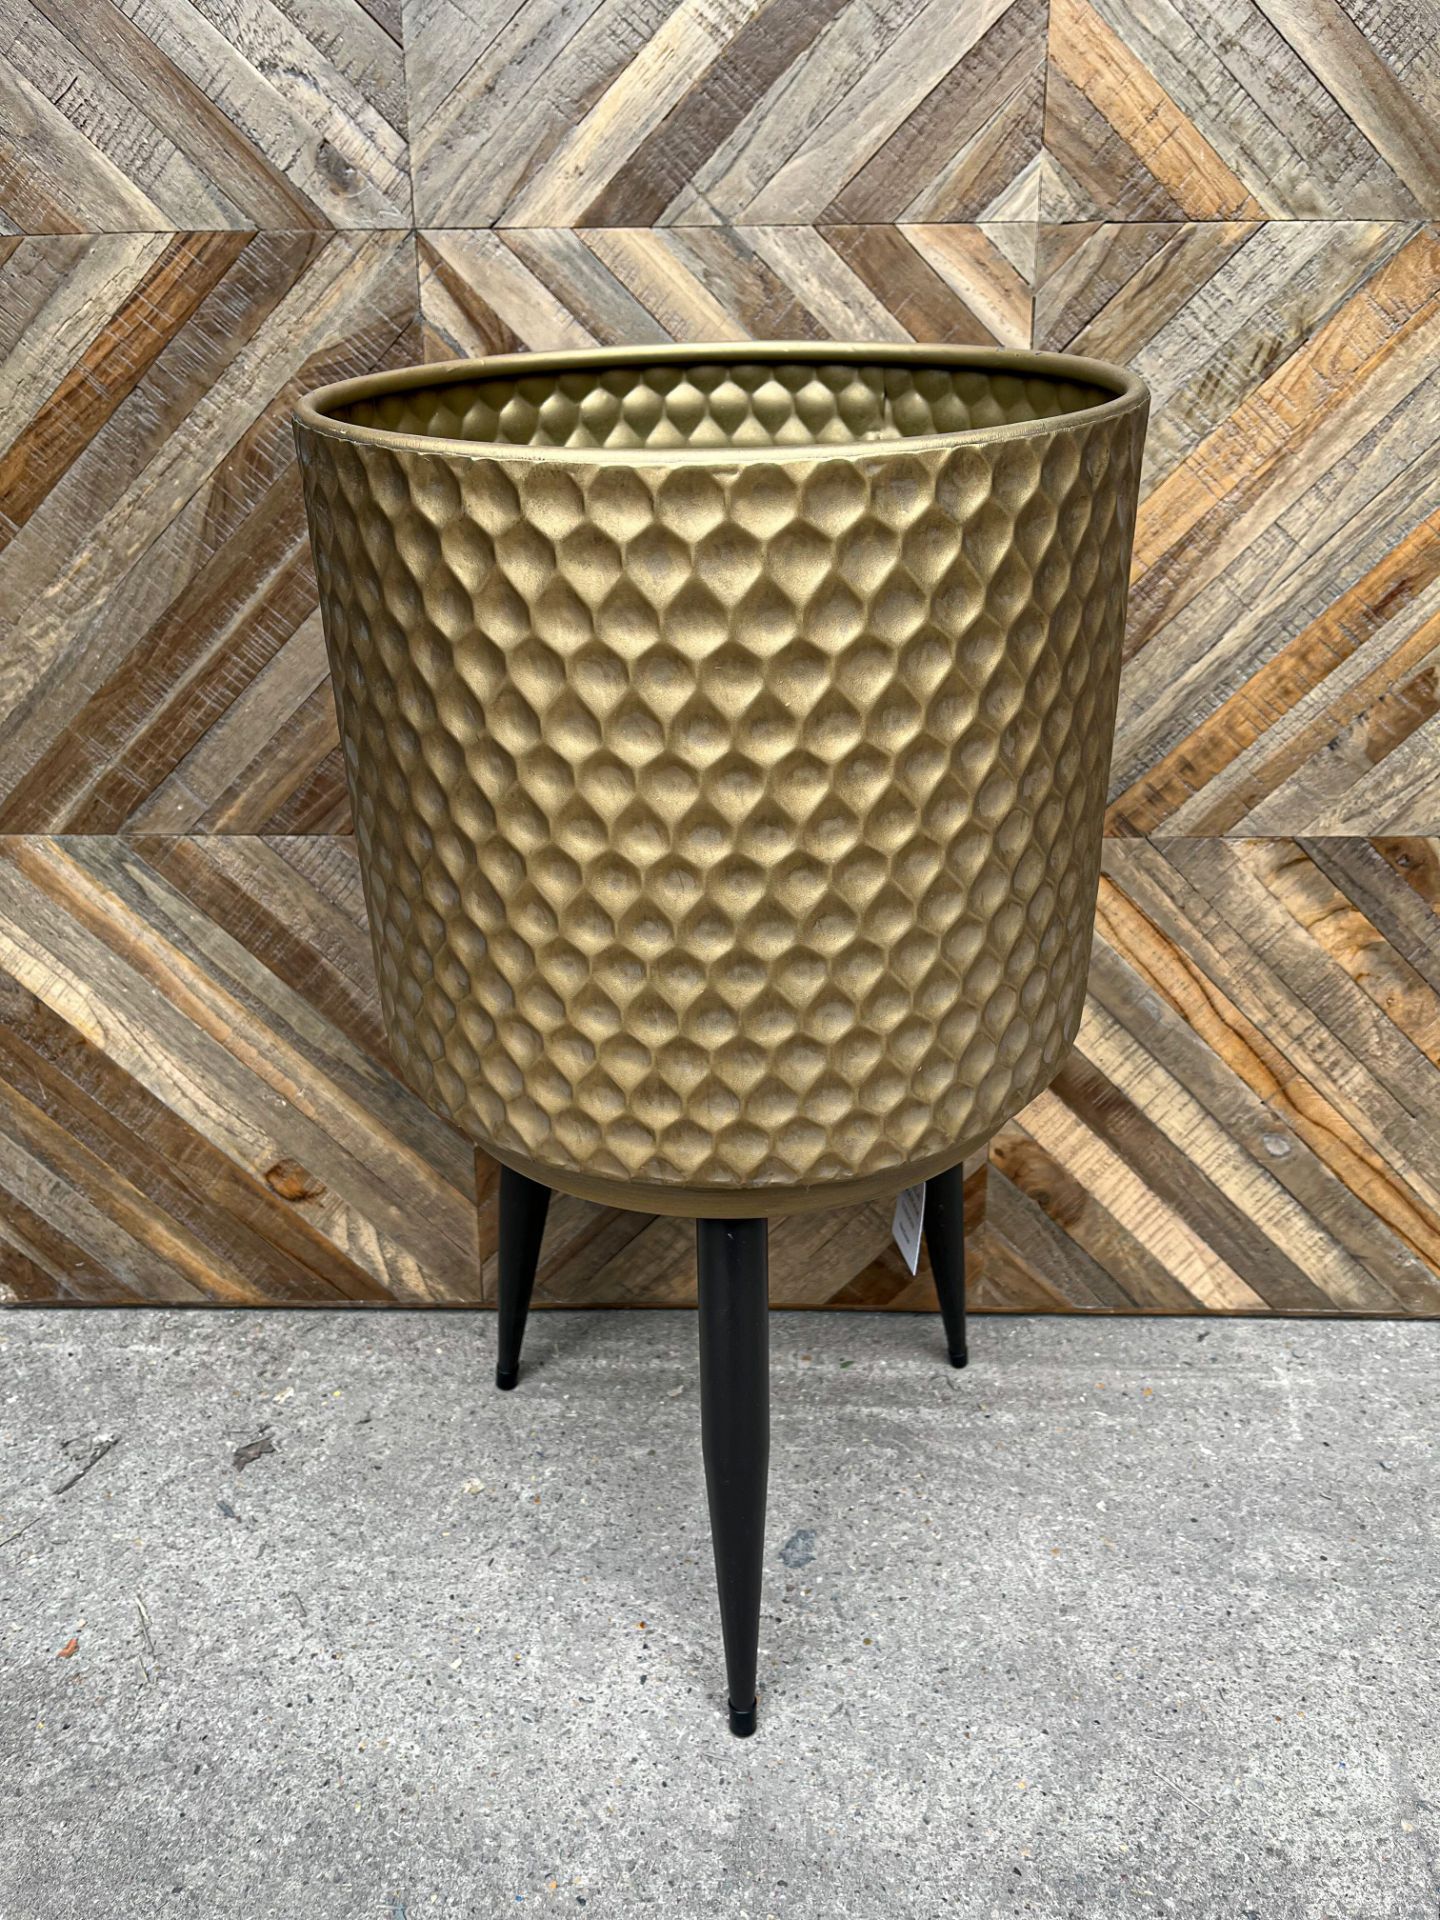 PALLET TO INCLUDE 60 X BRAND NEW GISELA GRAHAM GOLD DIMPLE METAL POT COVERS WITH LEGS LARGE 31 X 55